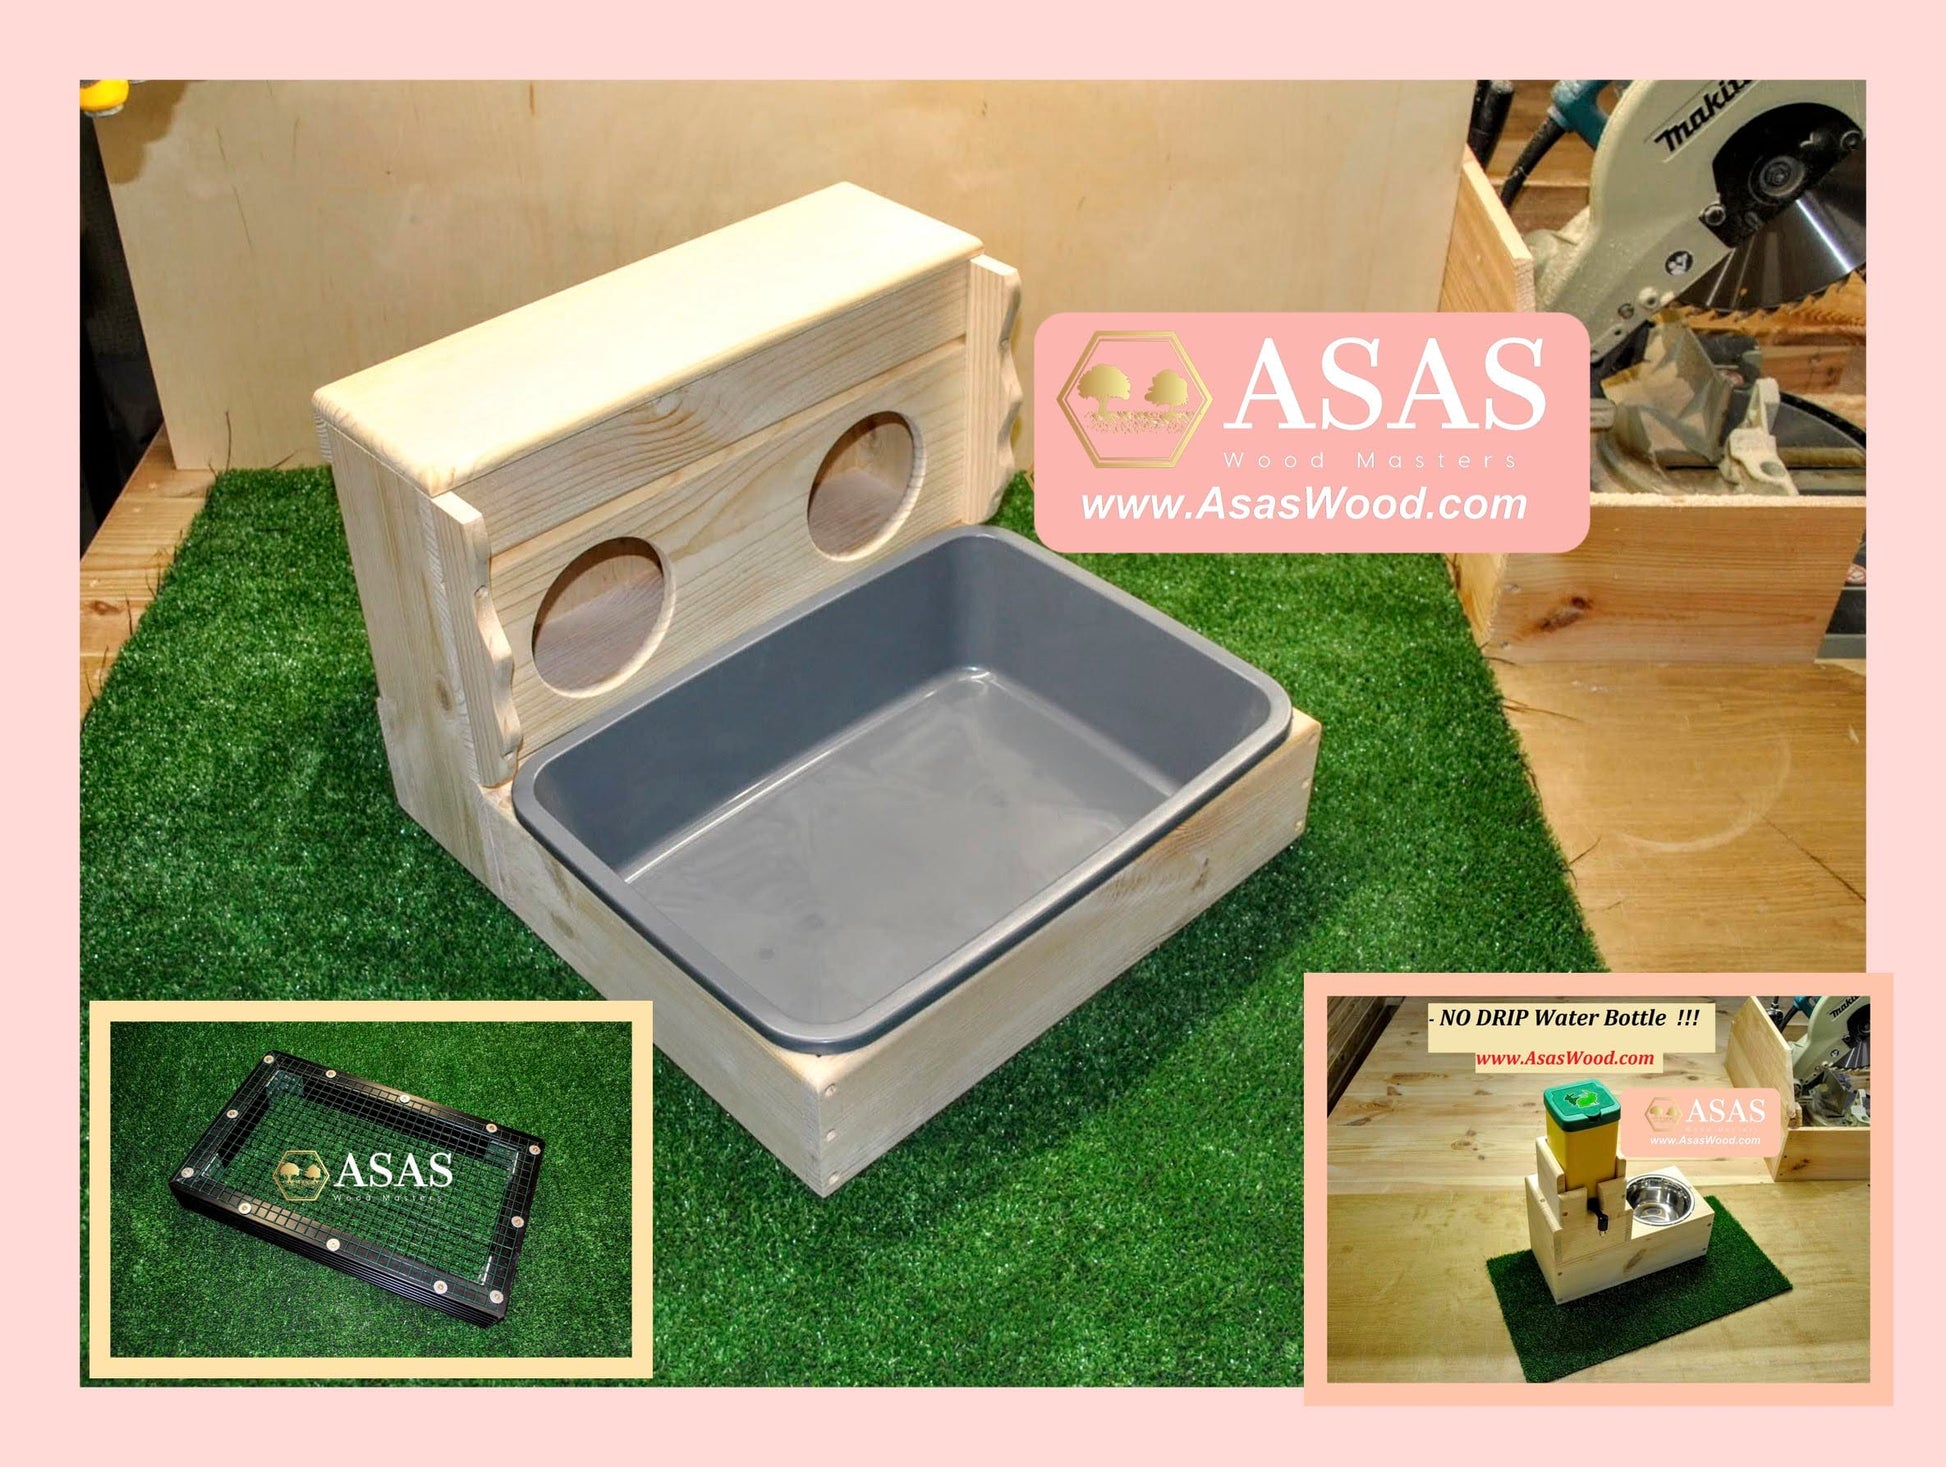 Wooden hay feeder with liter box for rabbit, made by asaswood